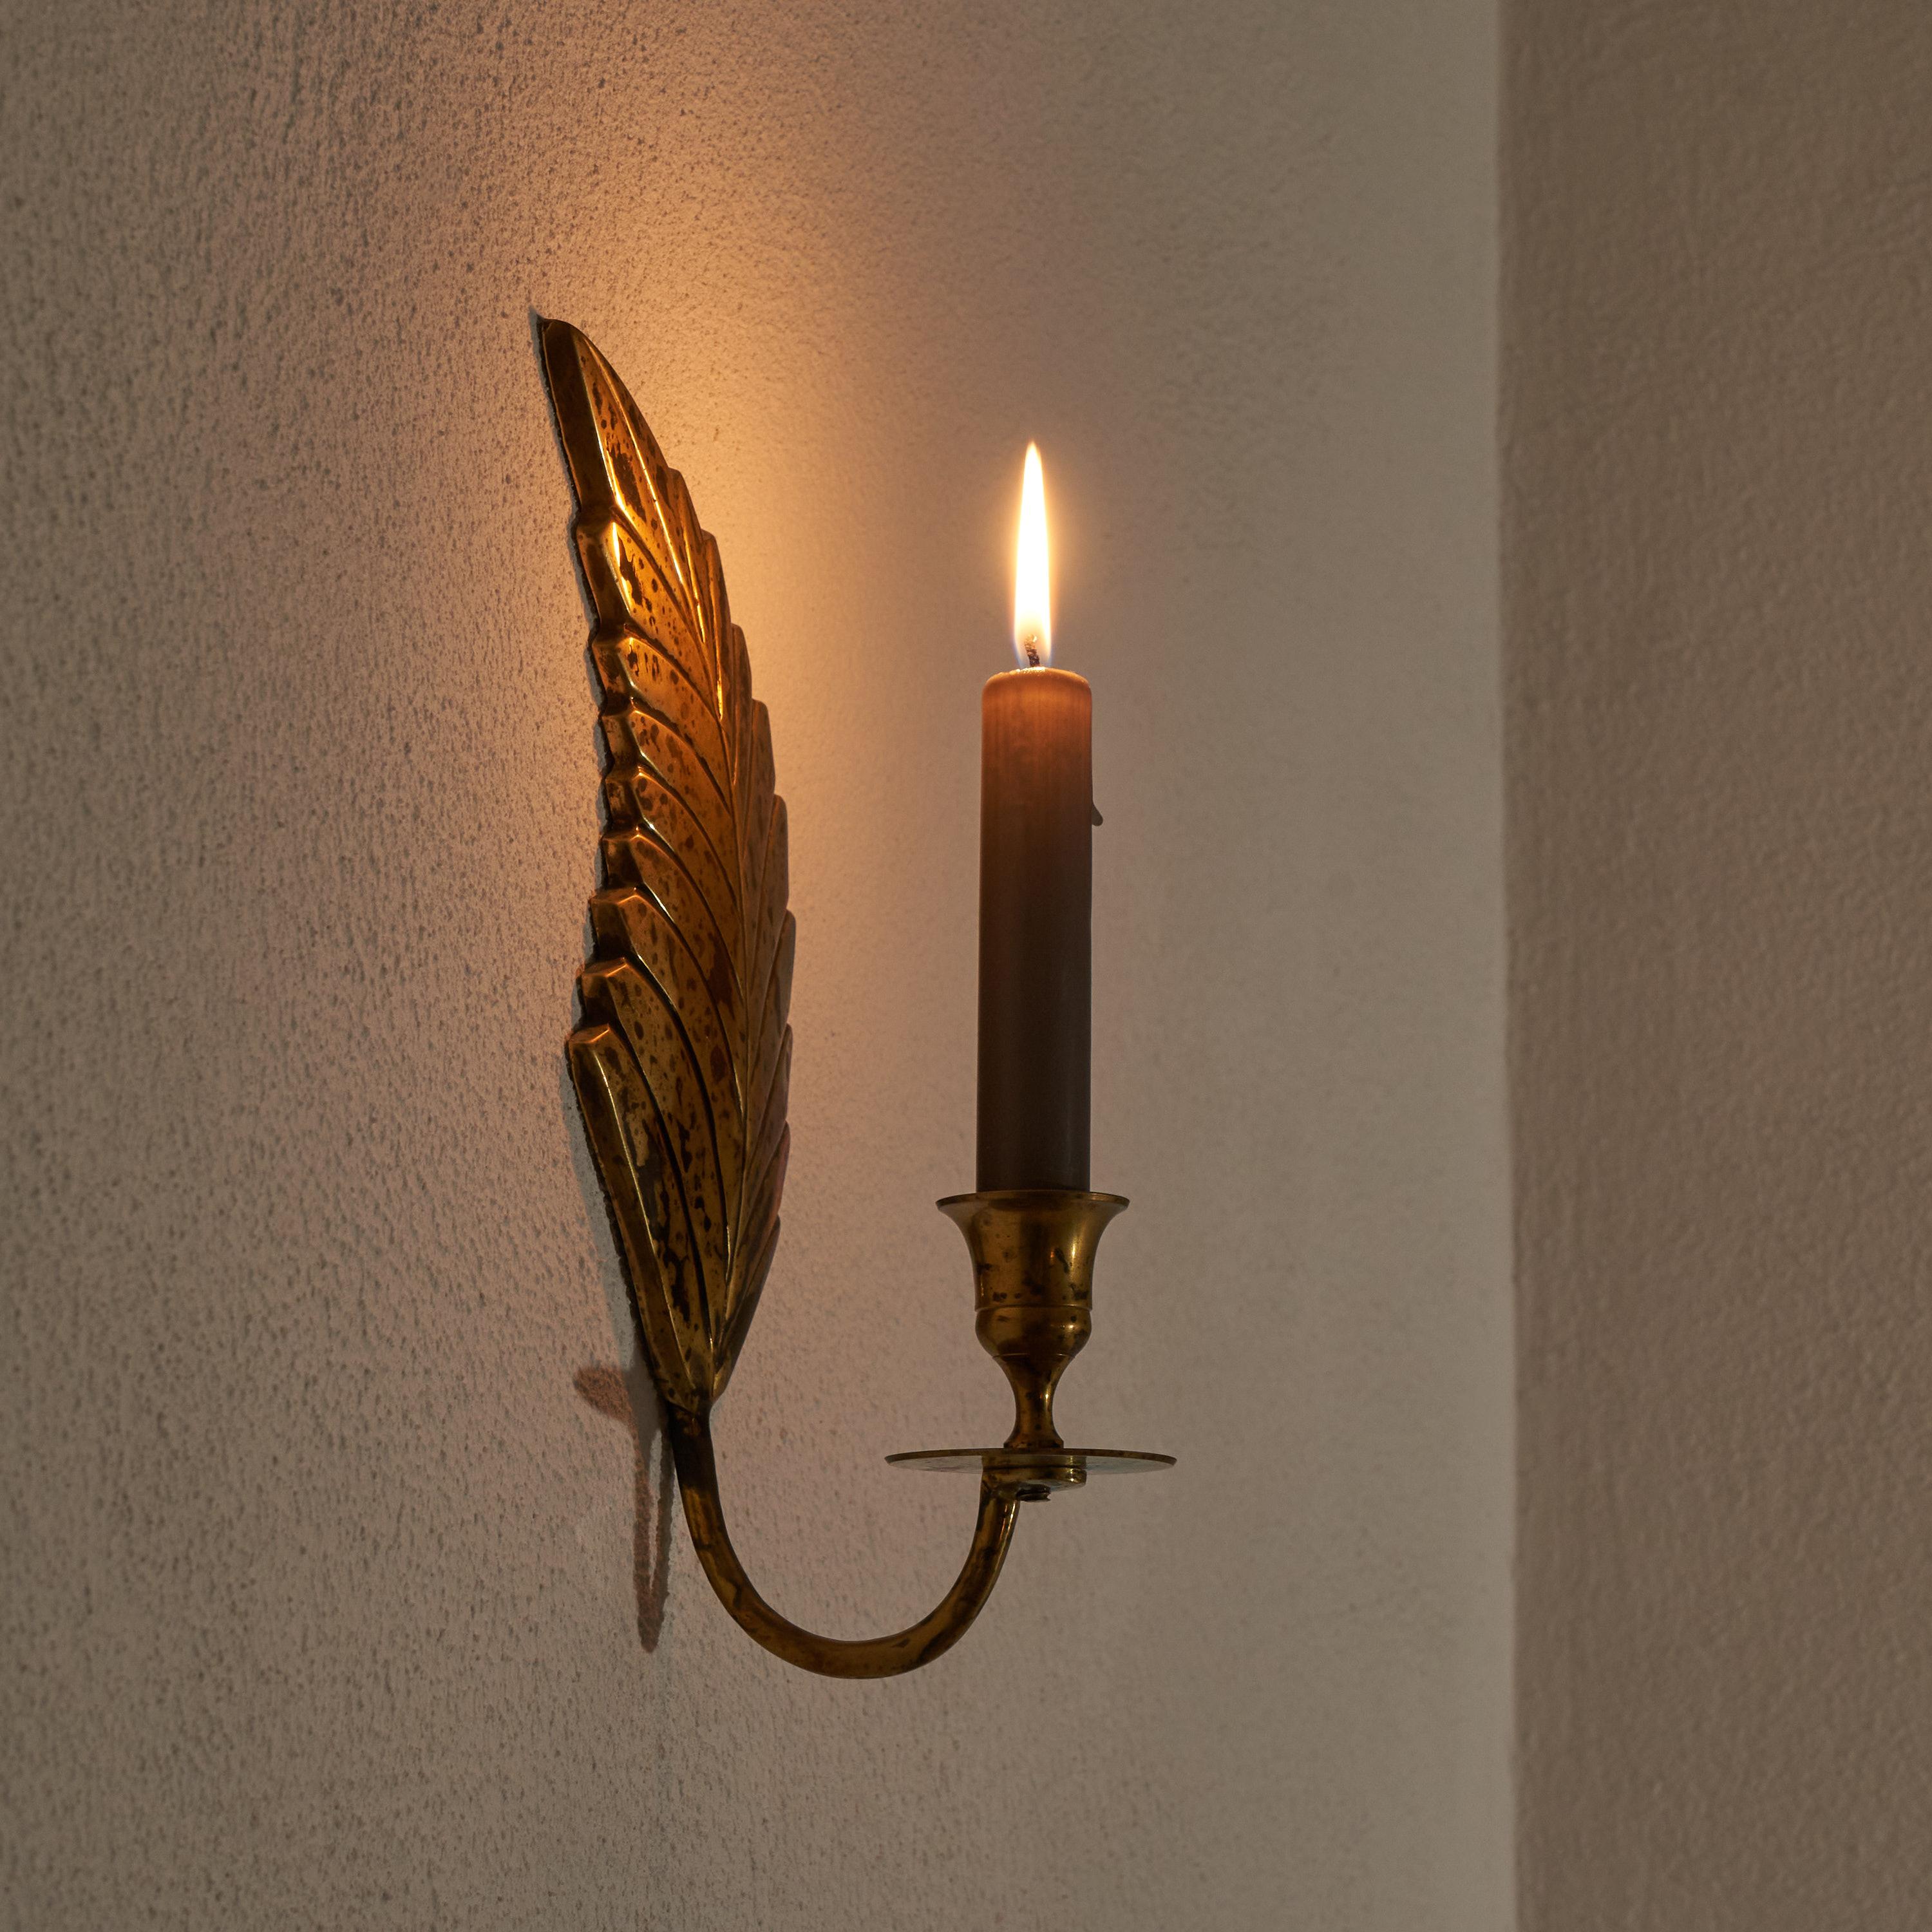 Mid-Century Modern Leaf Shaped Candle Sconce in Patinated Brass 1970s For Sale